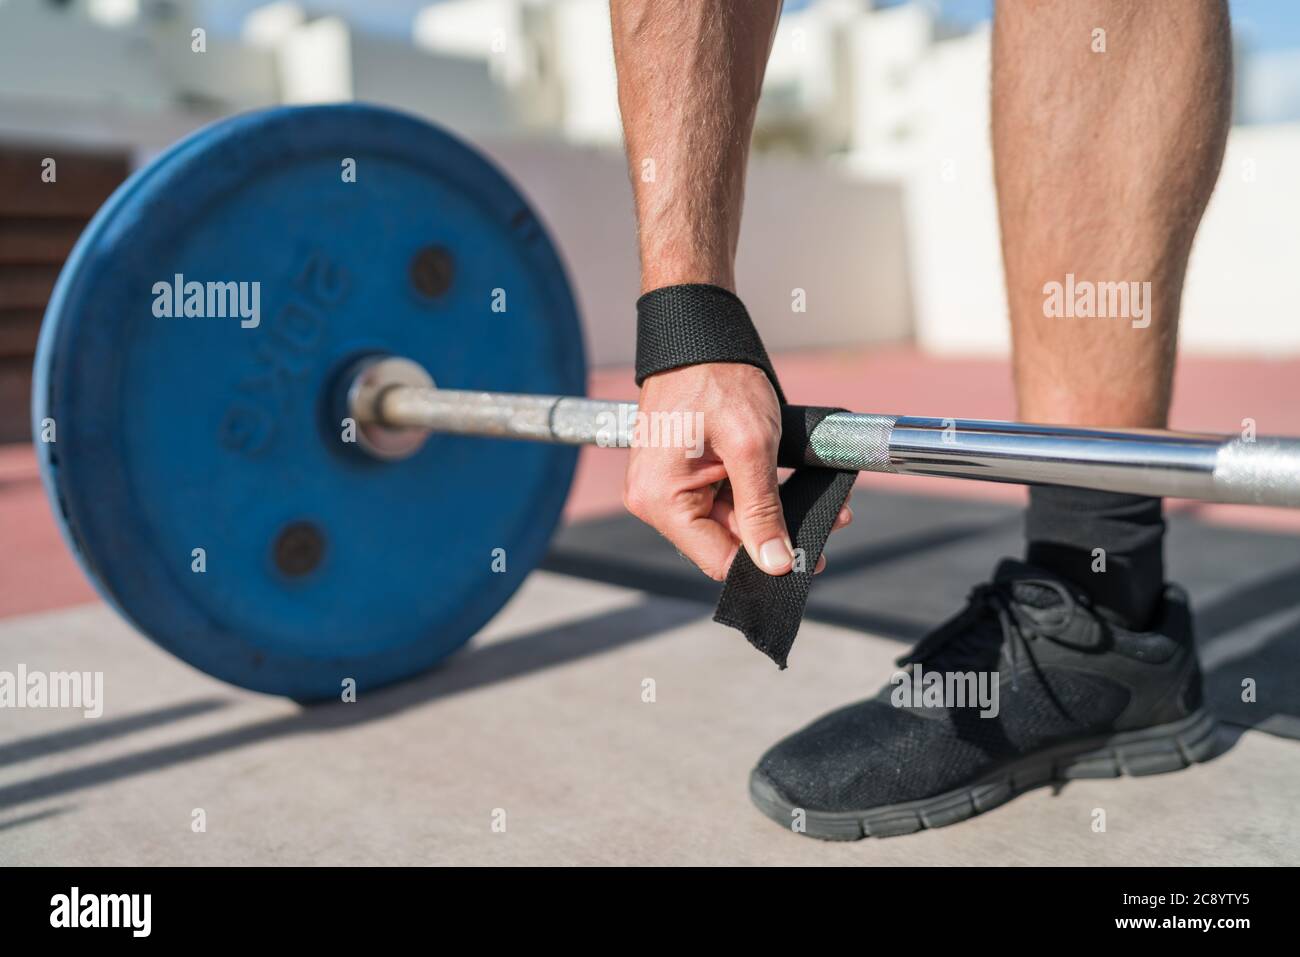 Weightlifting wrist straps fitness man Stock Photo